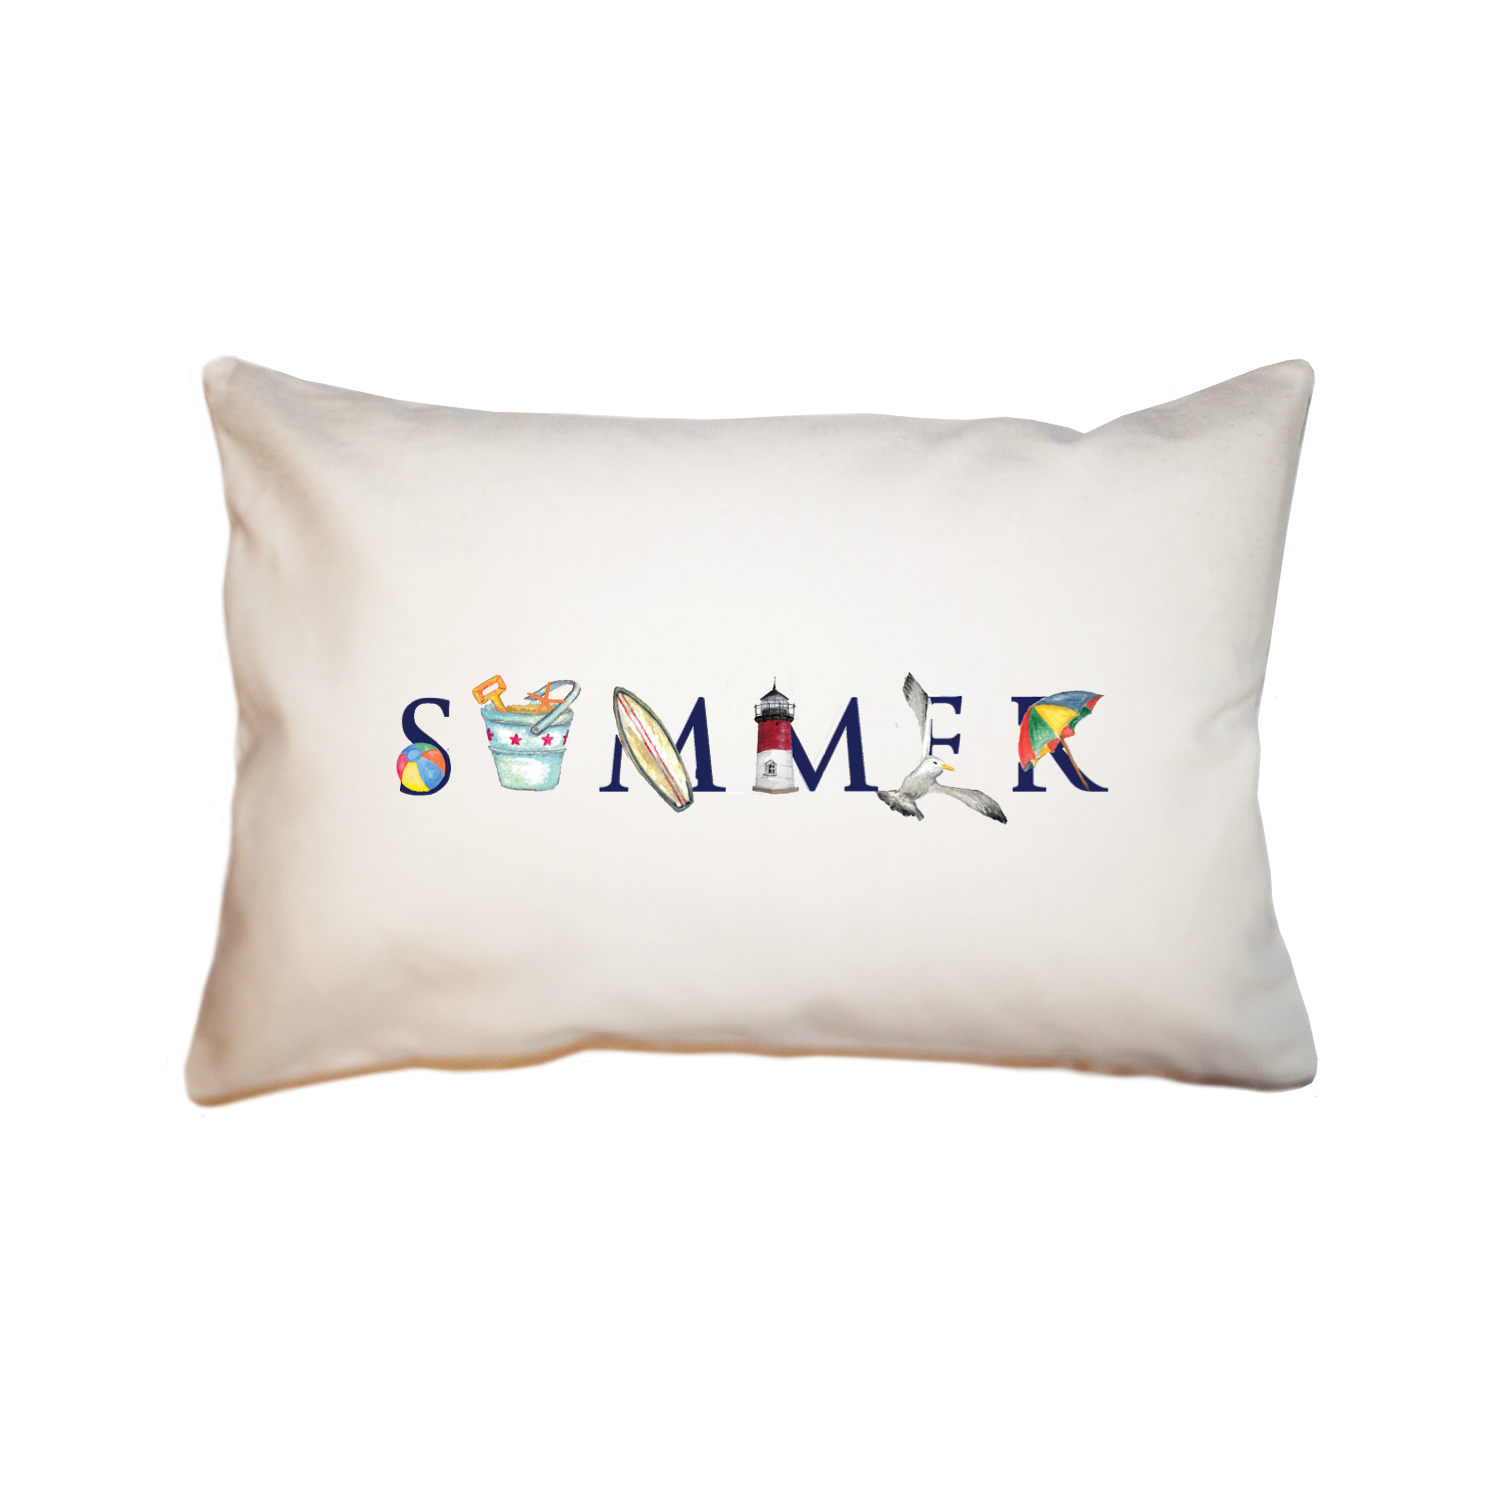 summer (new england version) large rectangle pillow